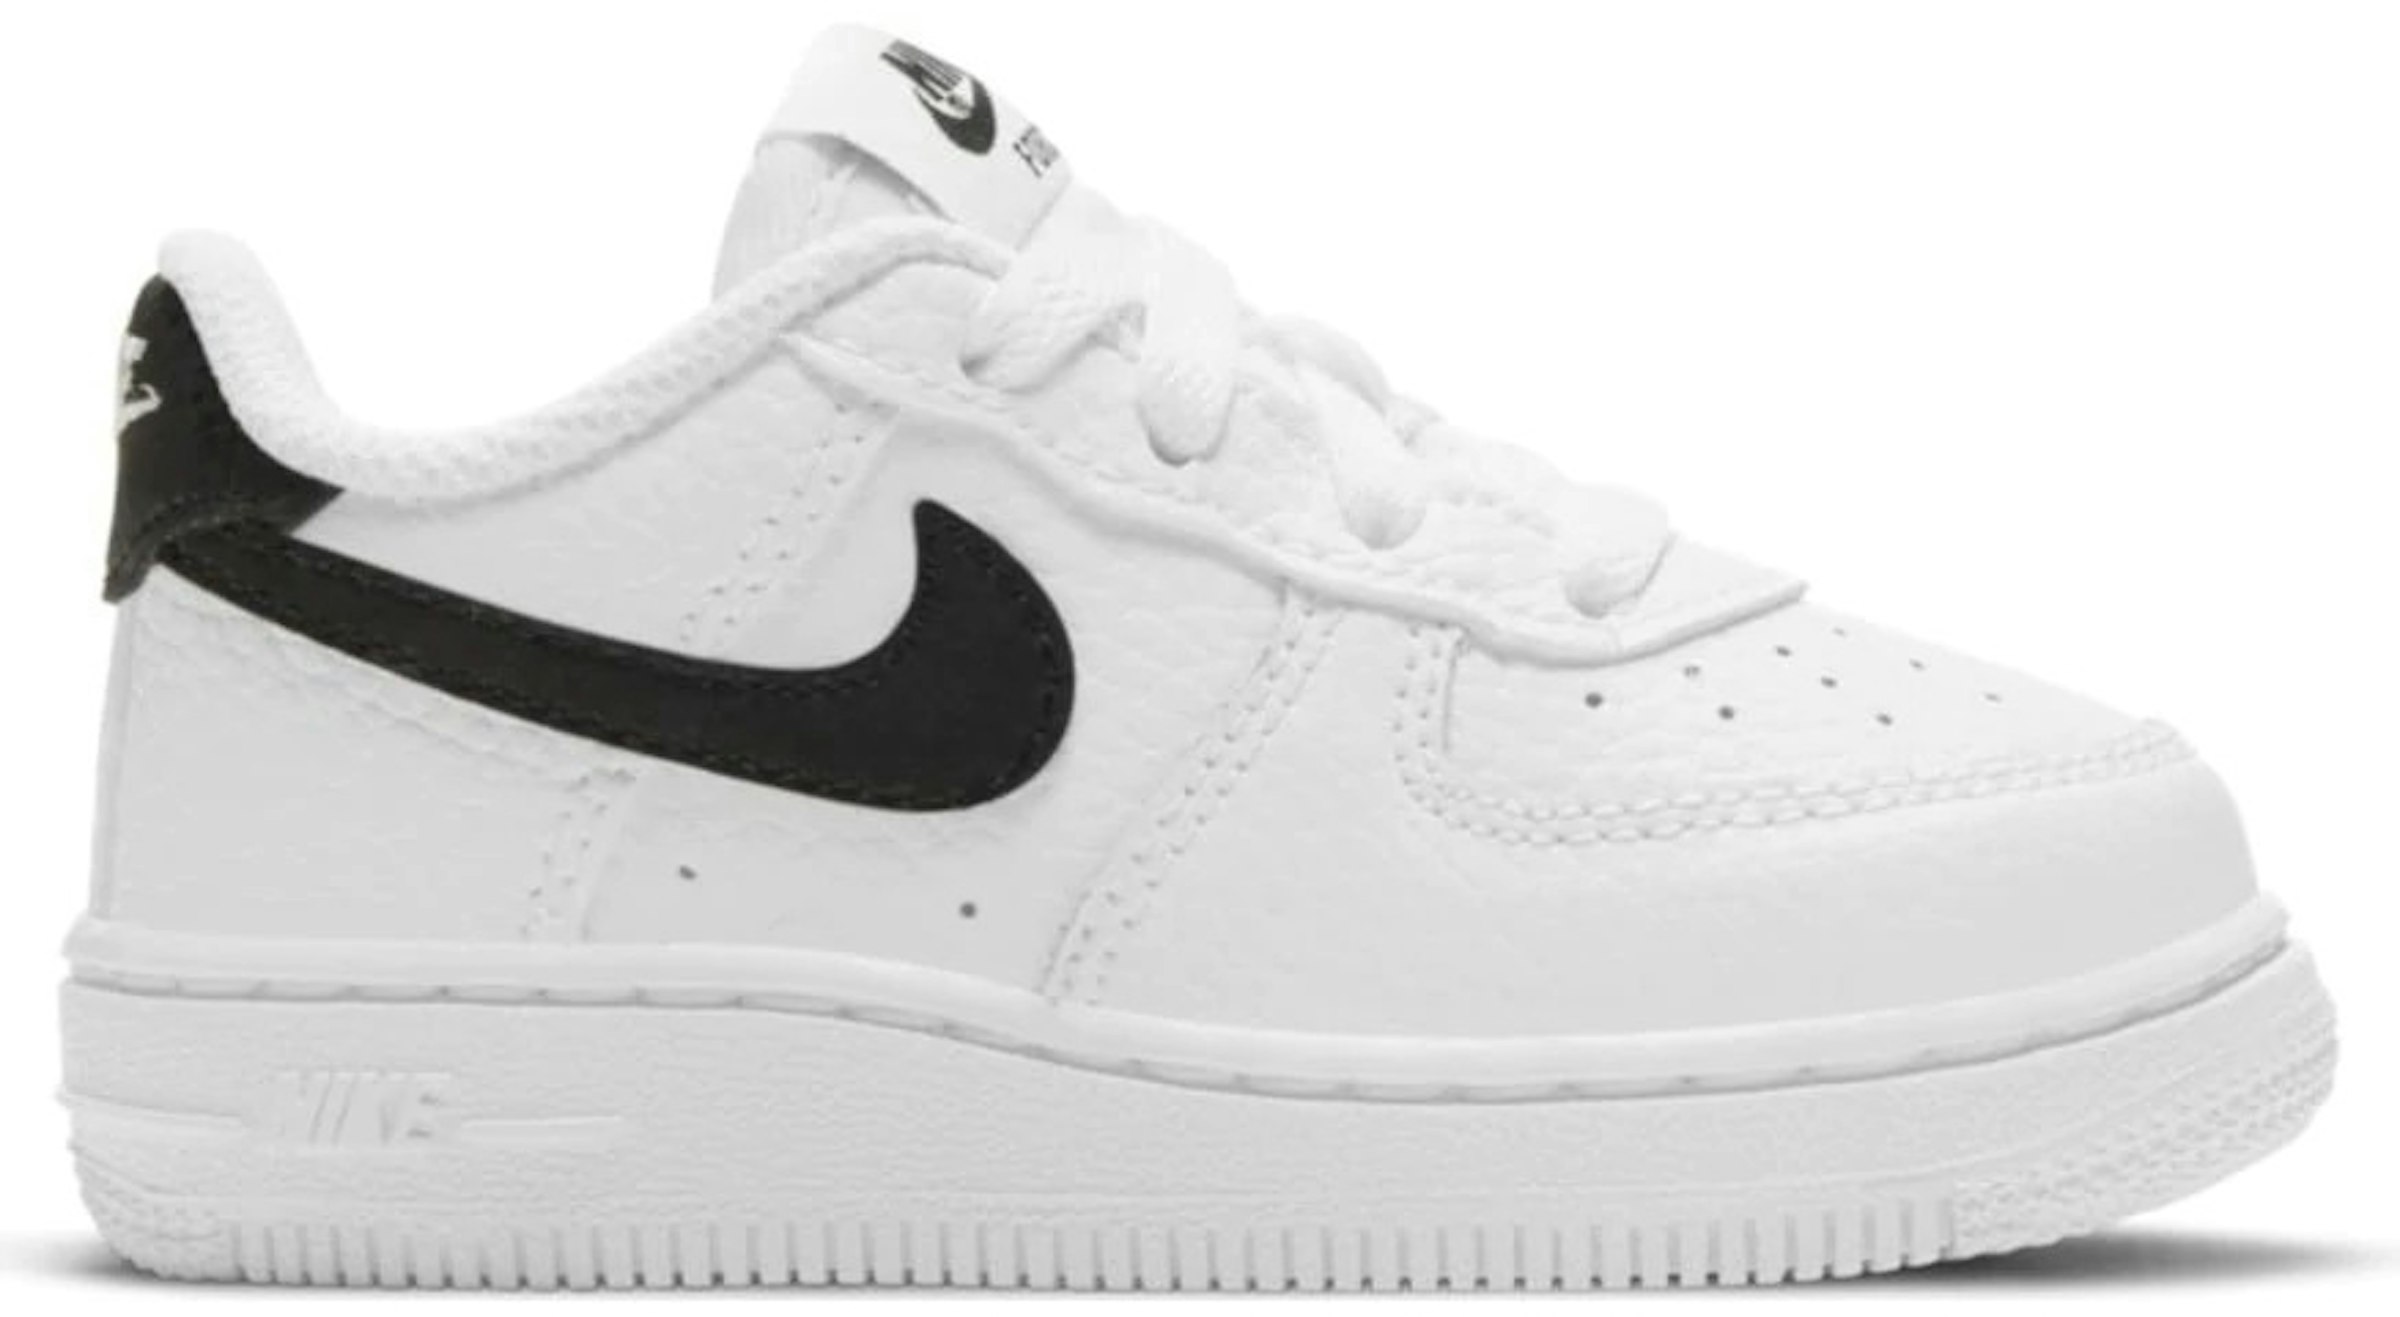 Buigen schroot pedaal Nike Air Force 1 Low White Black Swoosh (TD) Toddler - CZ1691-100 - US